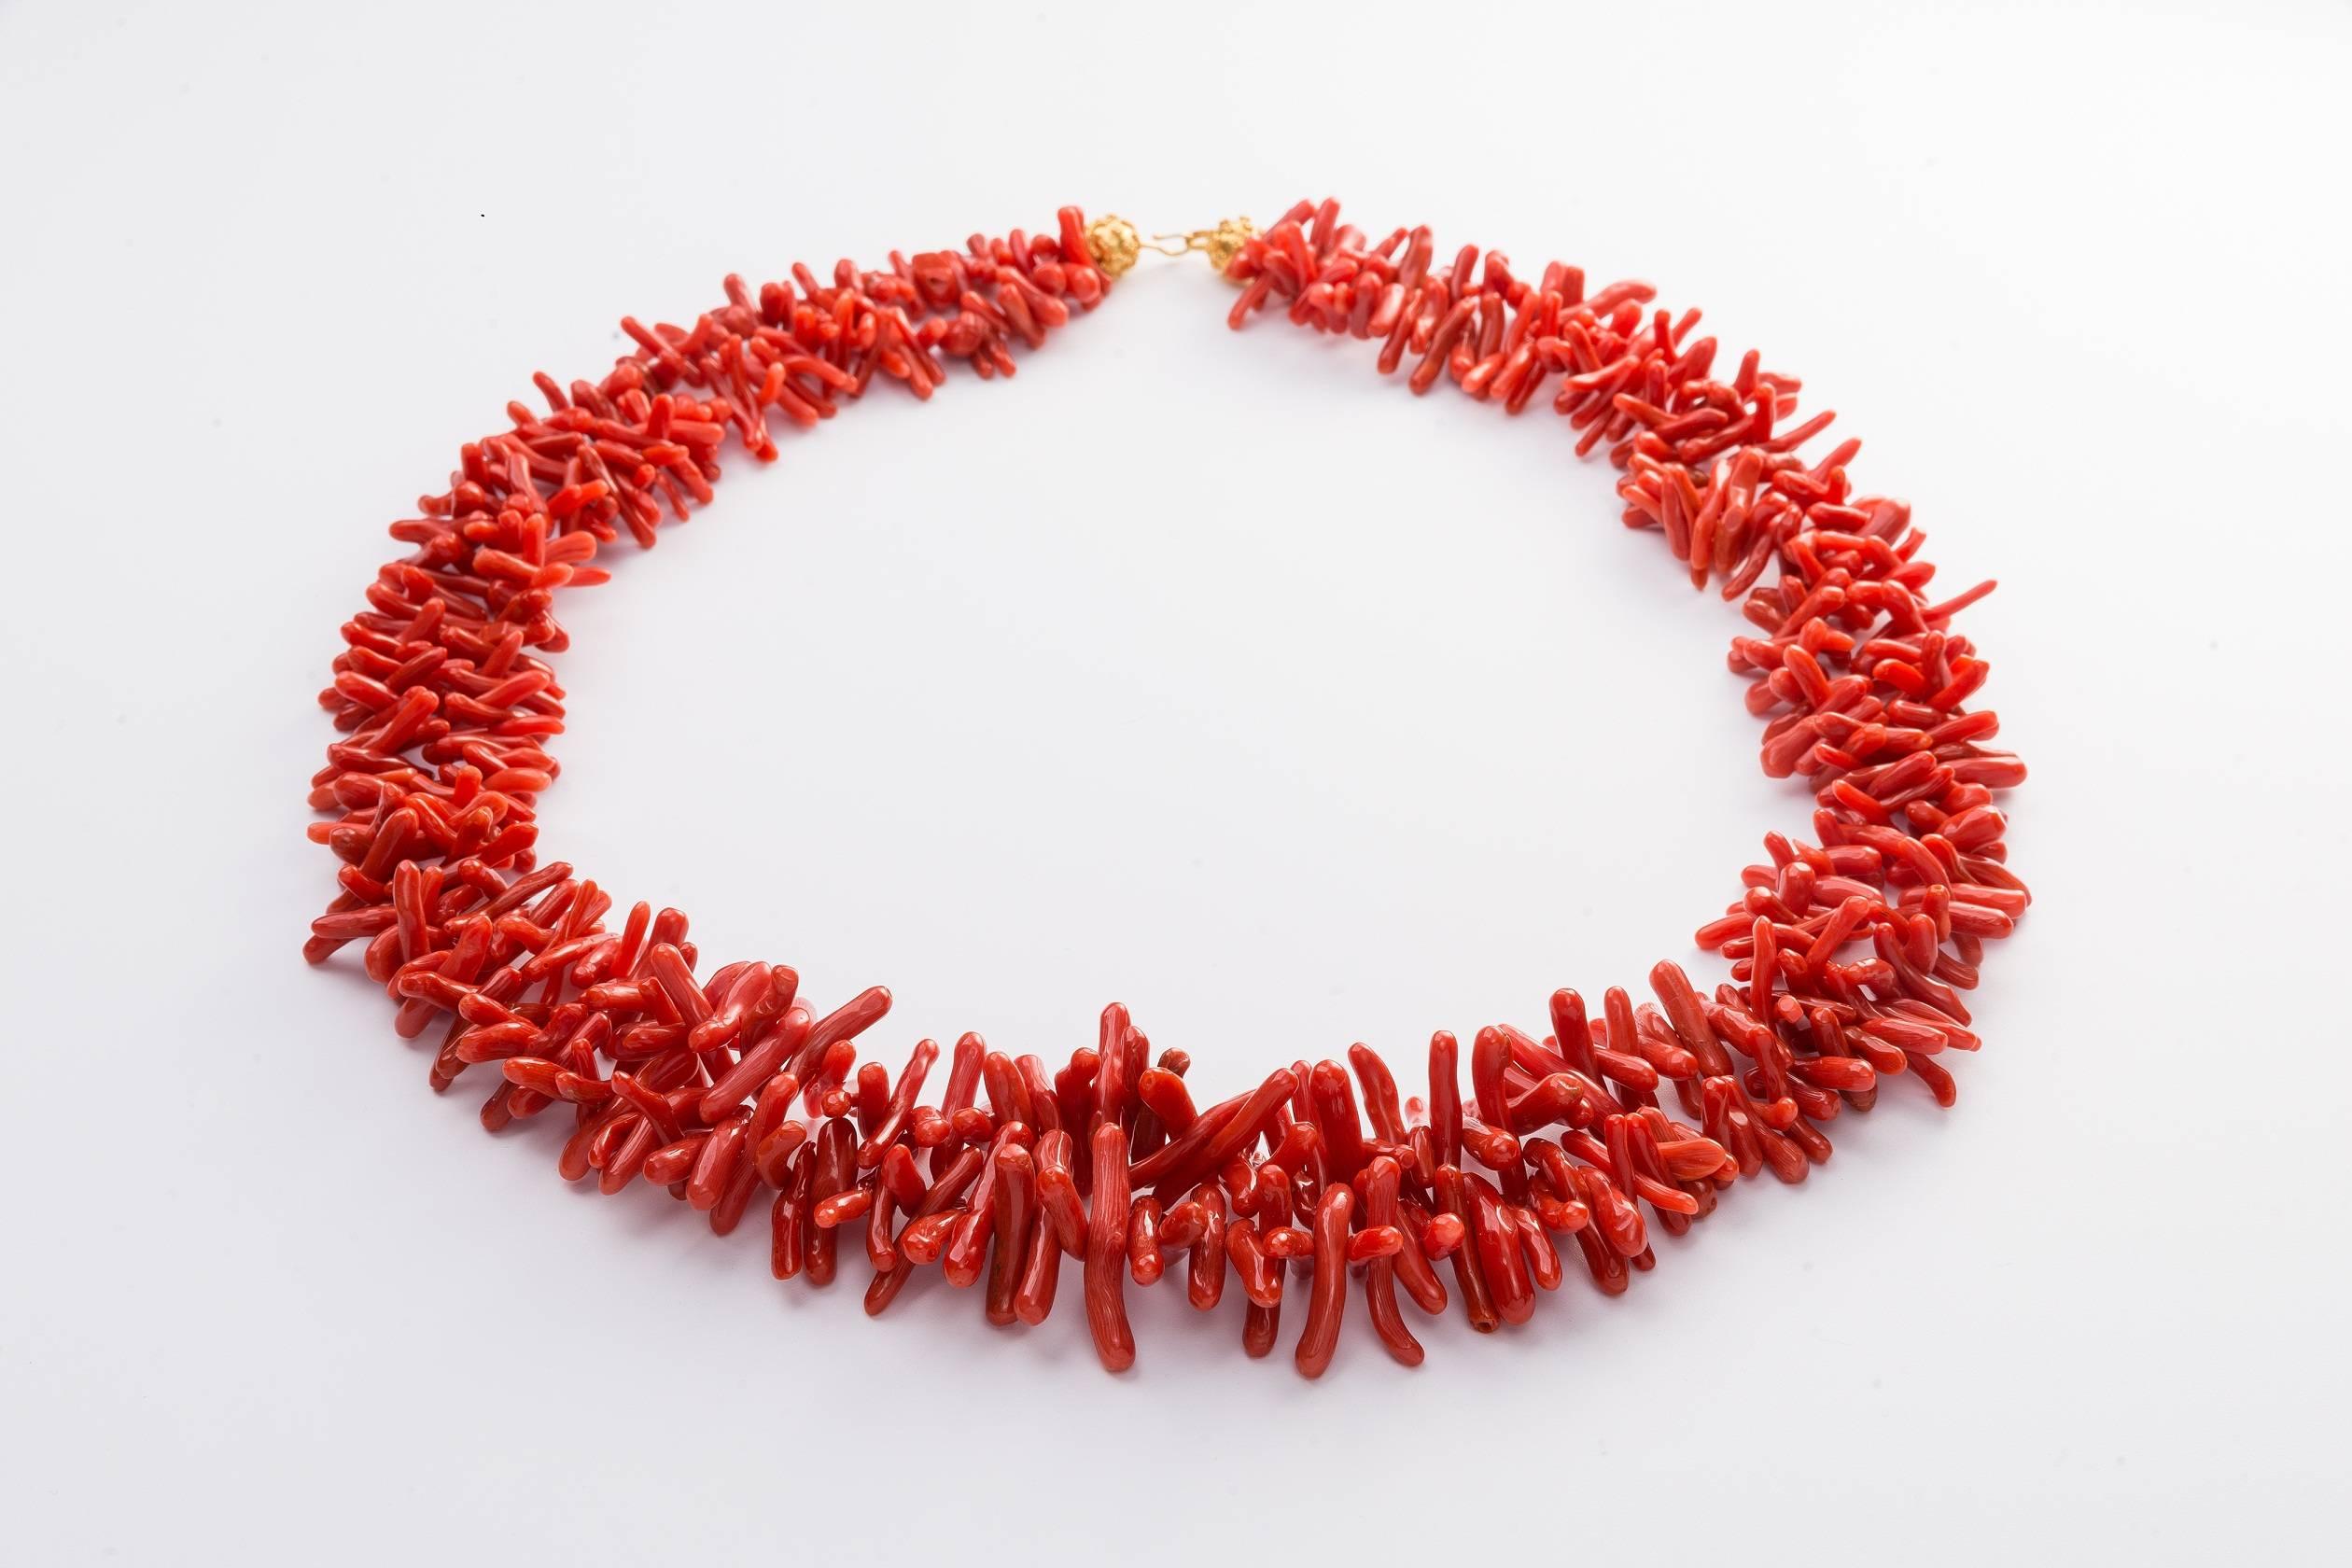 24.5 in L (62cmL) double strand Sardinian branch coral necklace with an 18-karat gold clasp
Two strands of the finest polished coral in a glorious deep colour capture the flavour of summer days perfectly.